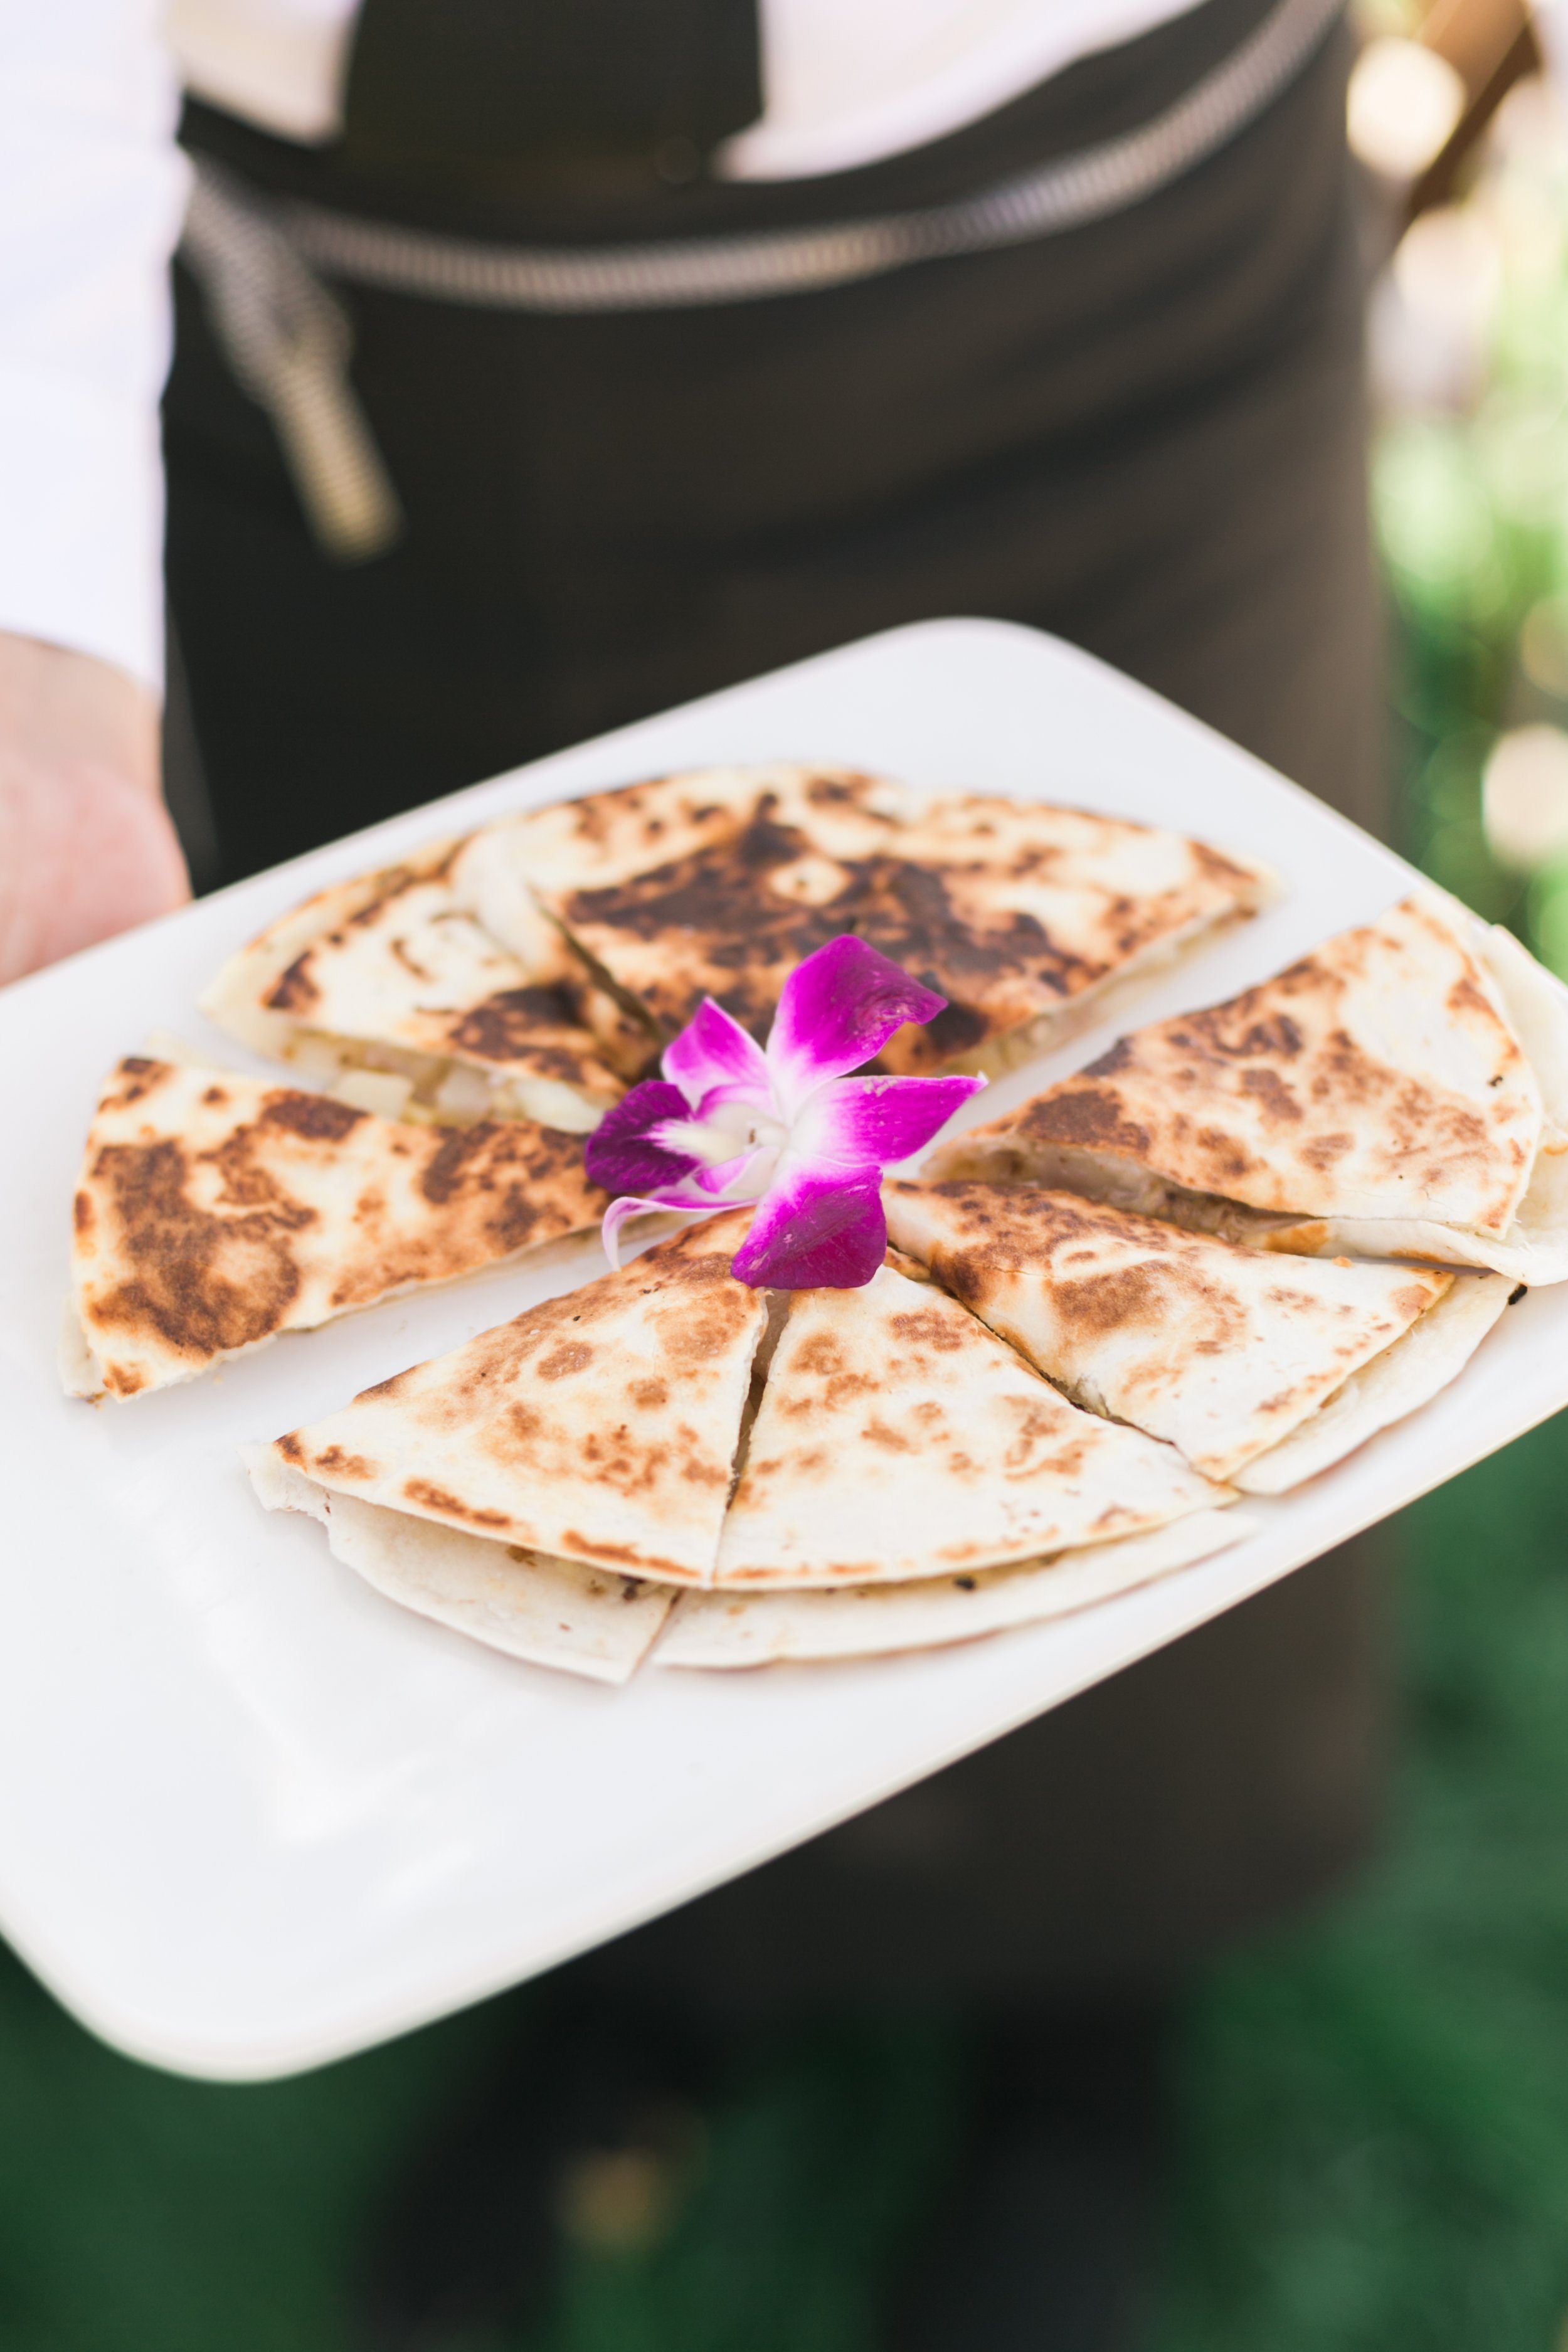 www.santabarbarawedding.com | Catering Connection | Anna J. Photography | Served Quesadillas